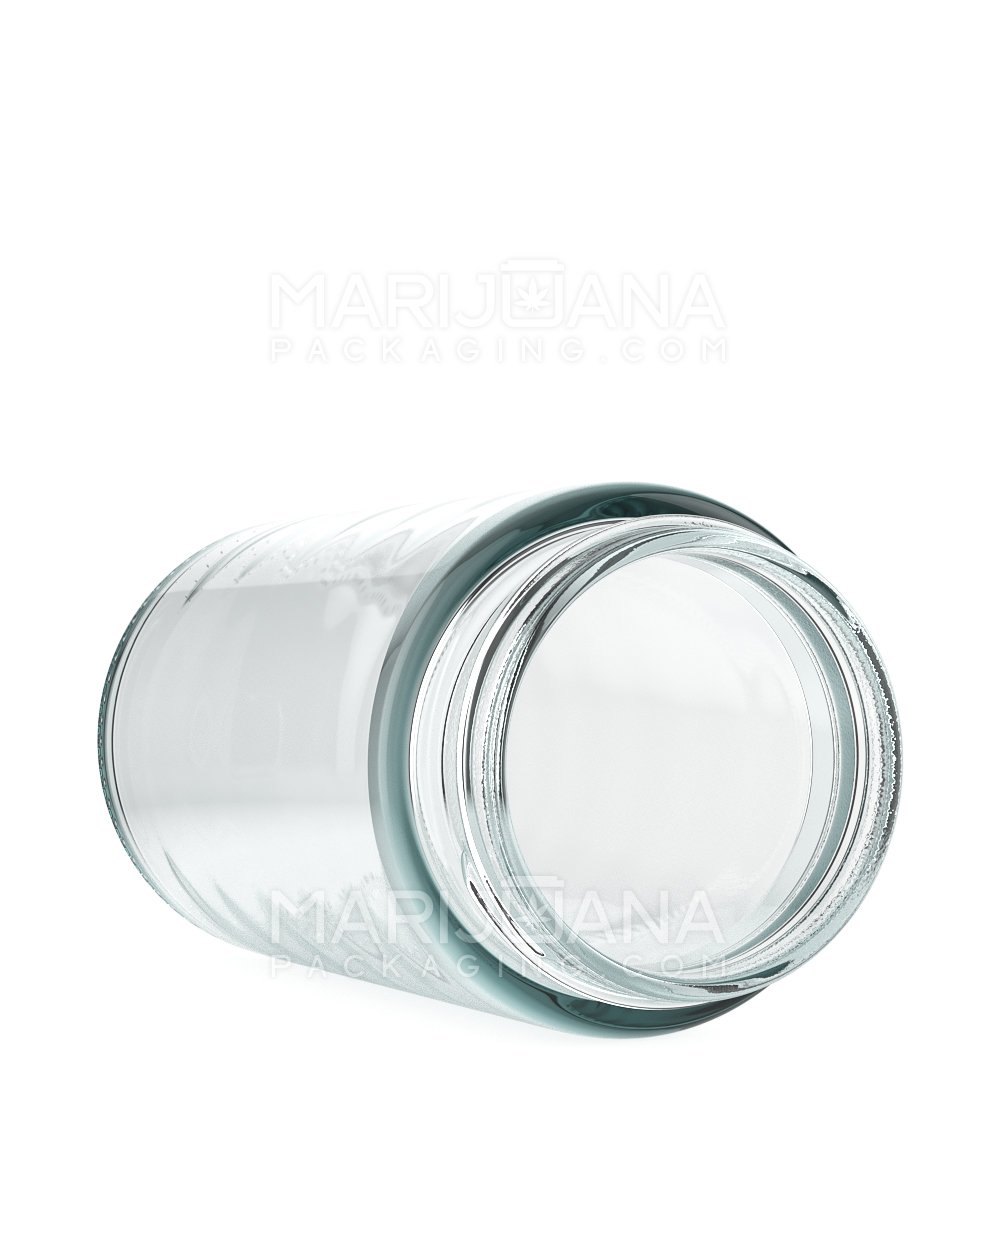 Straight Sided Clear Glass Jars | 50mm - 6oz - 80 Count - 3